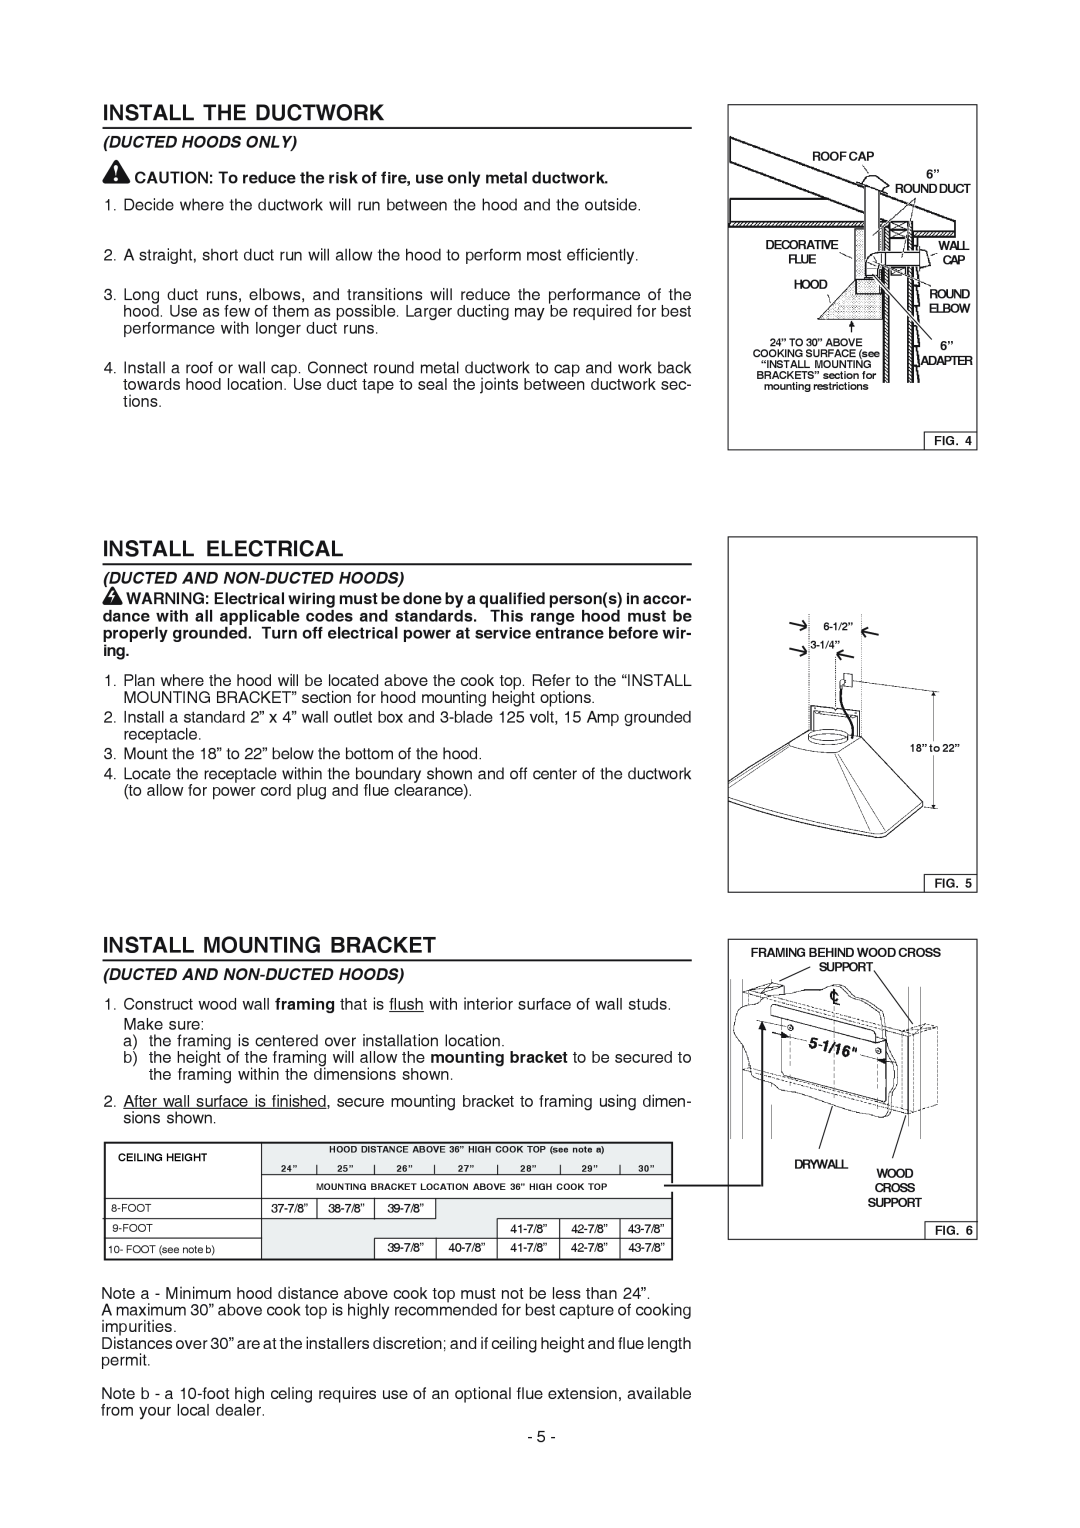 Frigidaire PL30WC51EC, PL42WC51EC Install The Ductwork, Install Electrical, Install Mounting Bracket, Ducted Hoods Only 